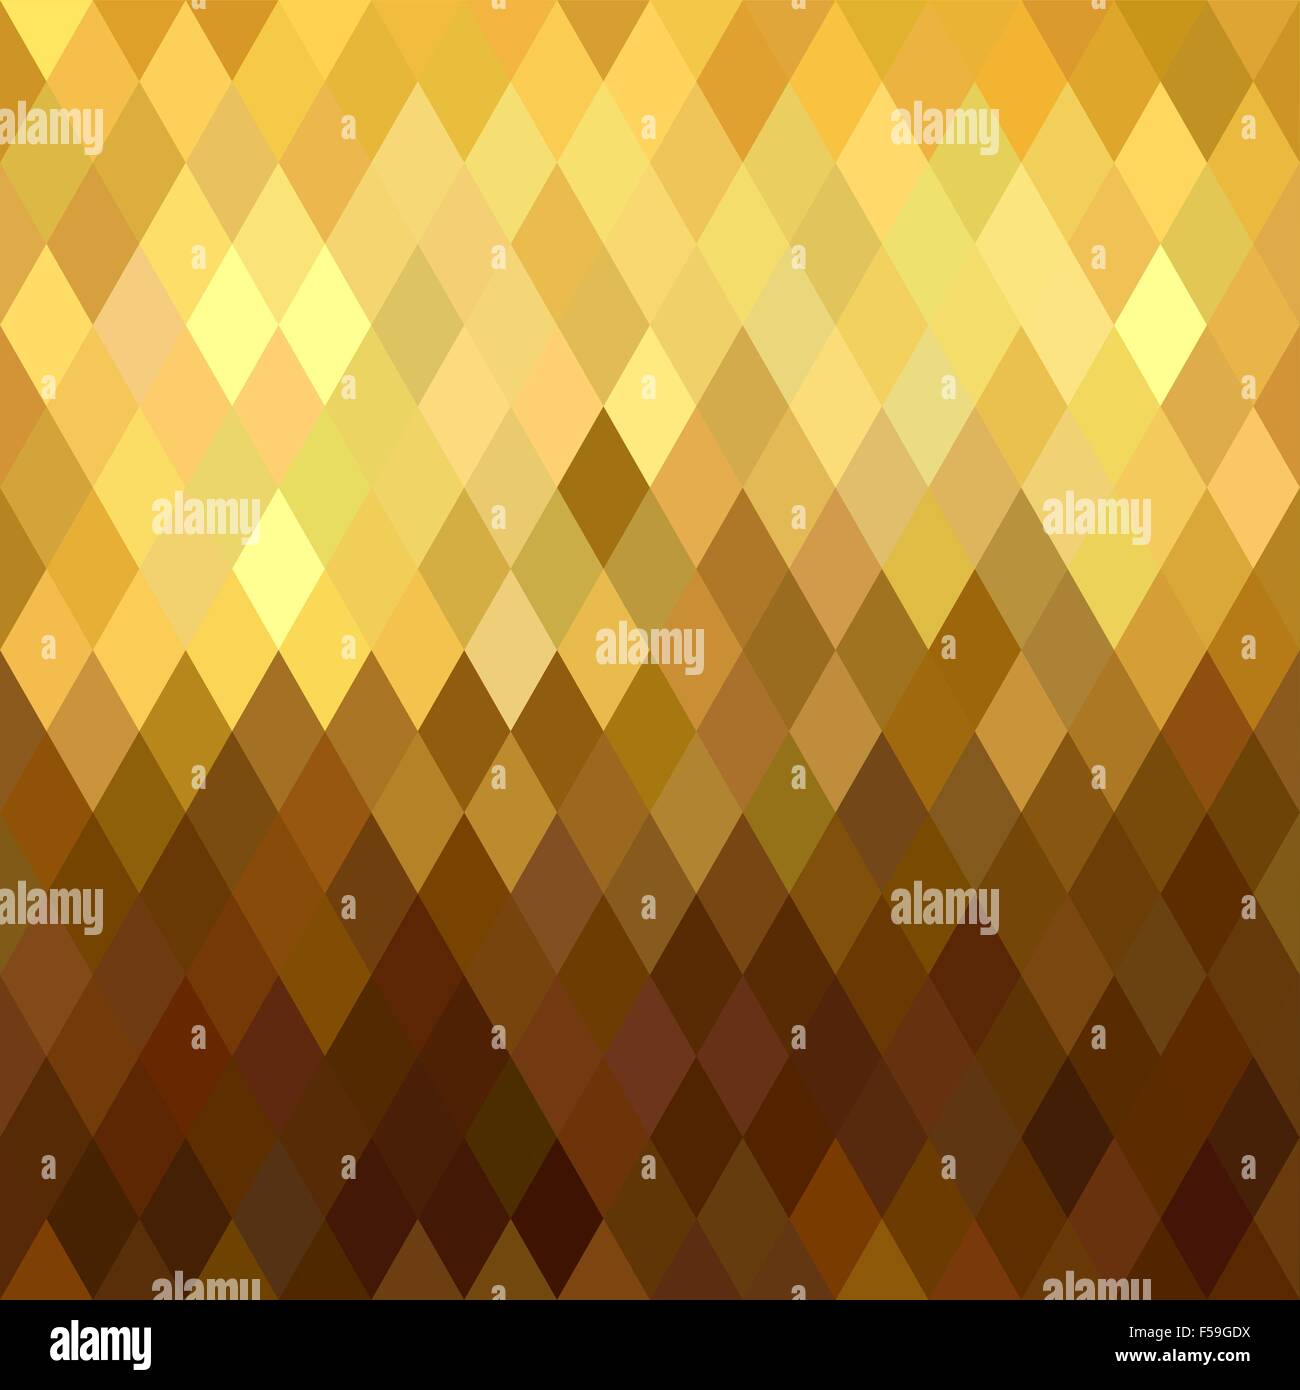 Fancy golden rhombus seamless pattern in low poly origami style. Ideal for web background, print, or greeting card. EPS10 vector Stock Vector